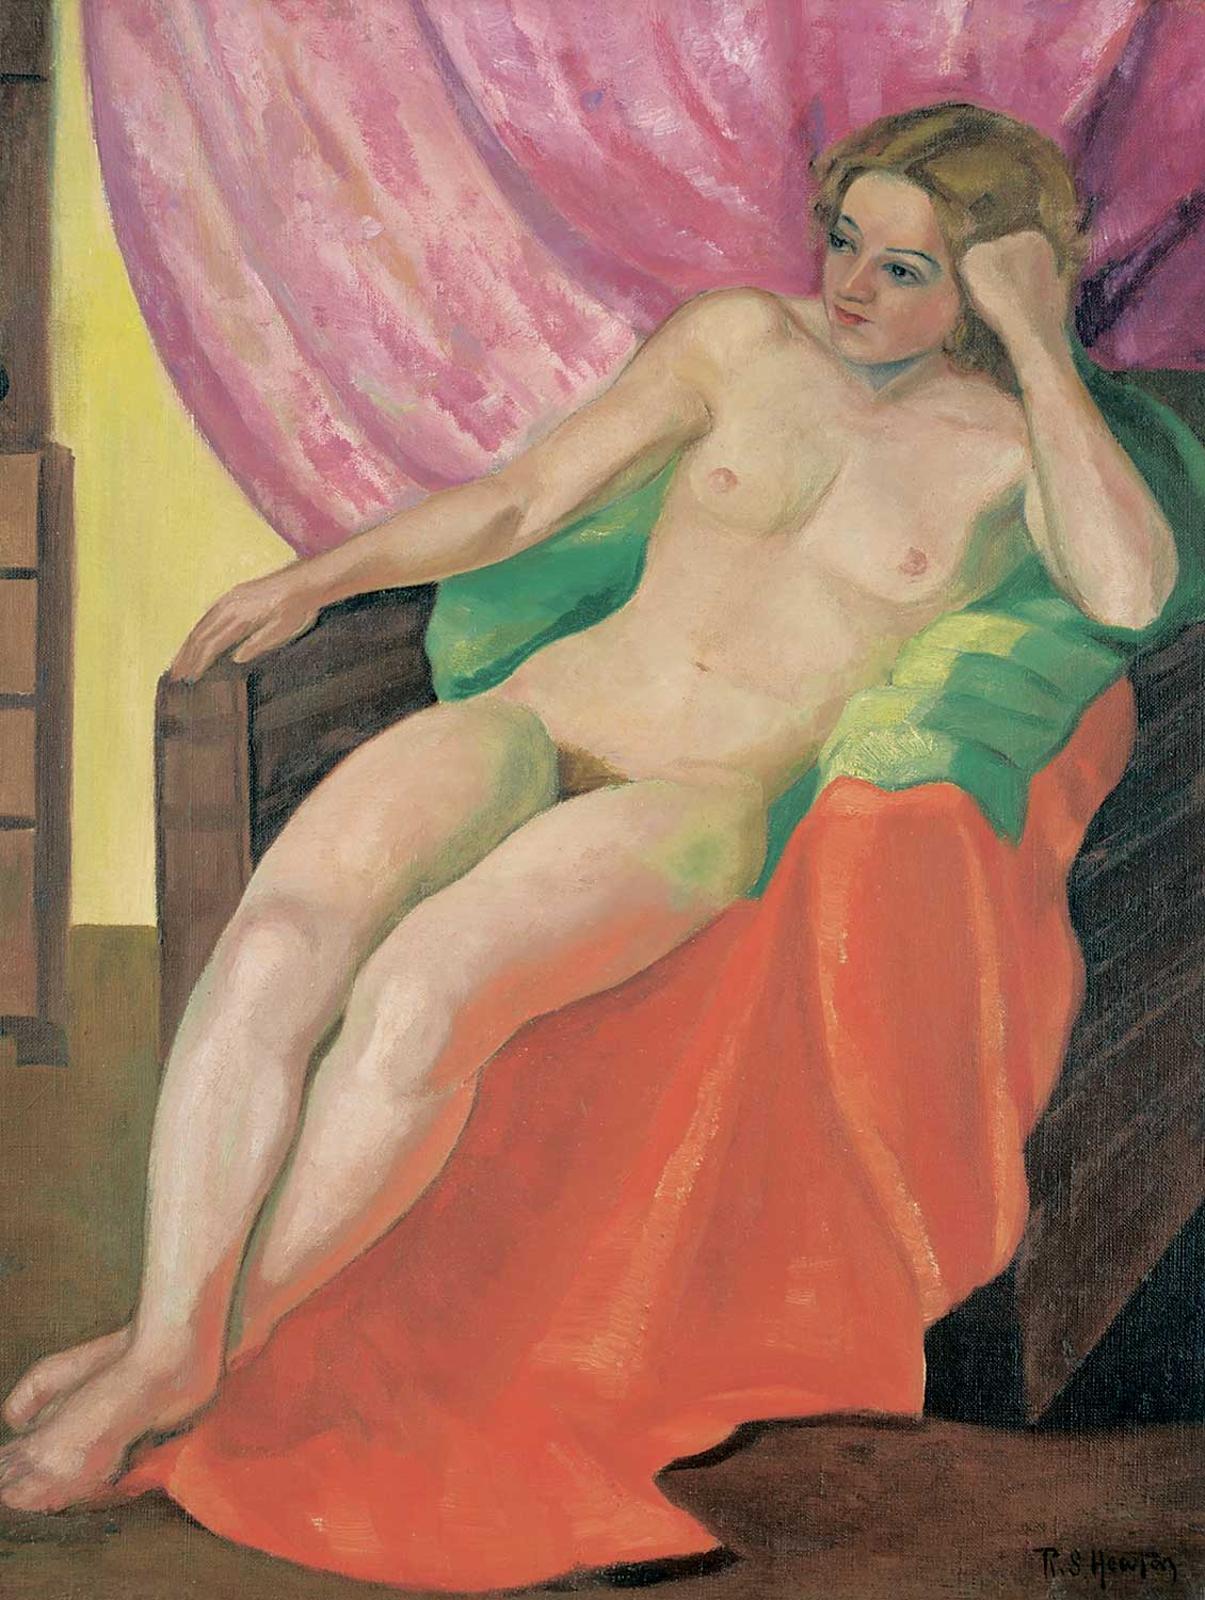 Randolph Stanley Hewton (1888-1960) - Untitled - Nude on Colourful Throws